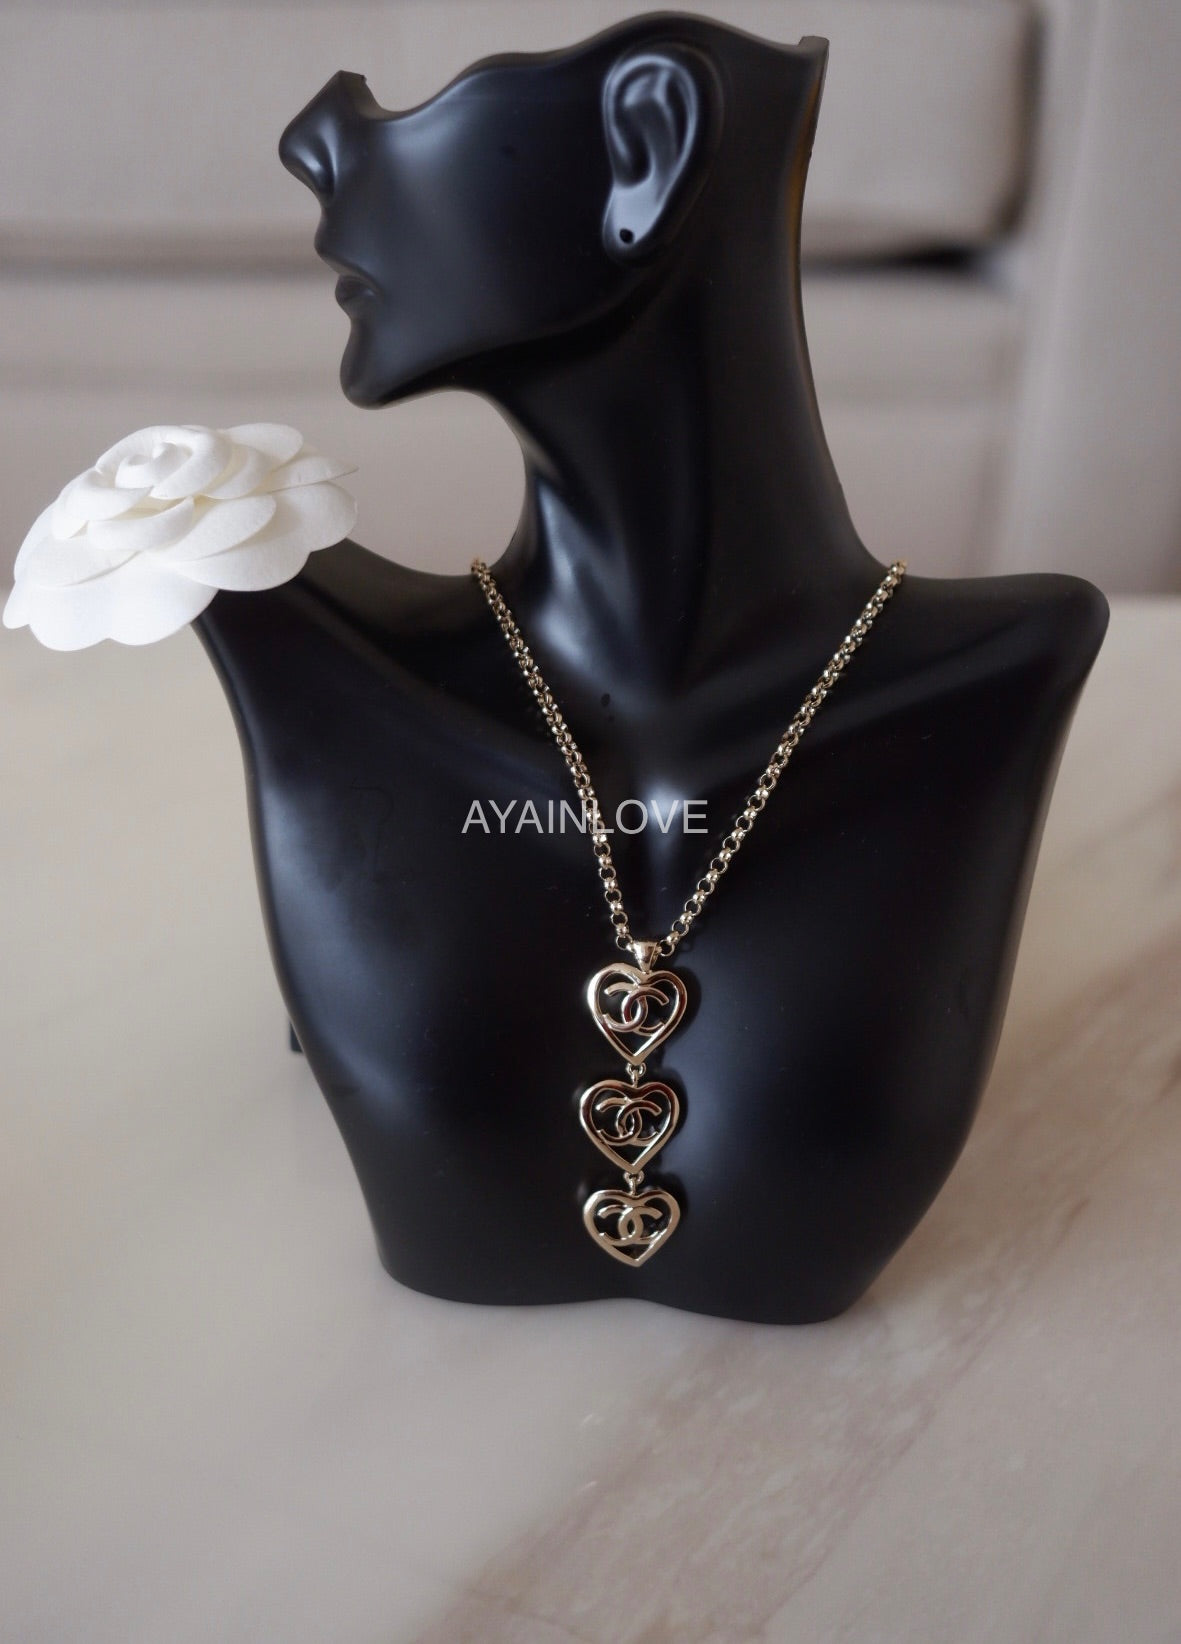 CHANEL 22P Heart Black Leather Choker Necklace Light Gold Hardware